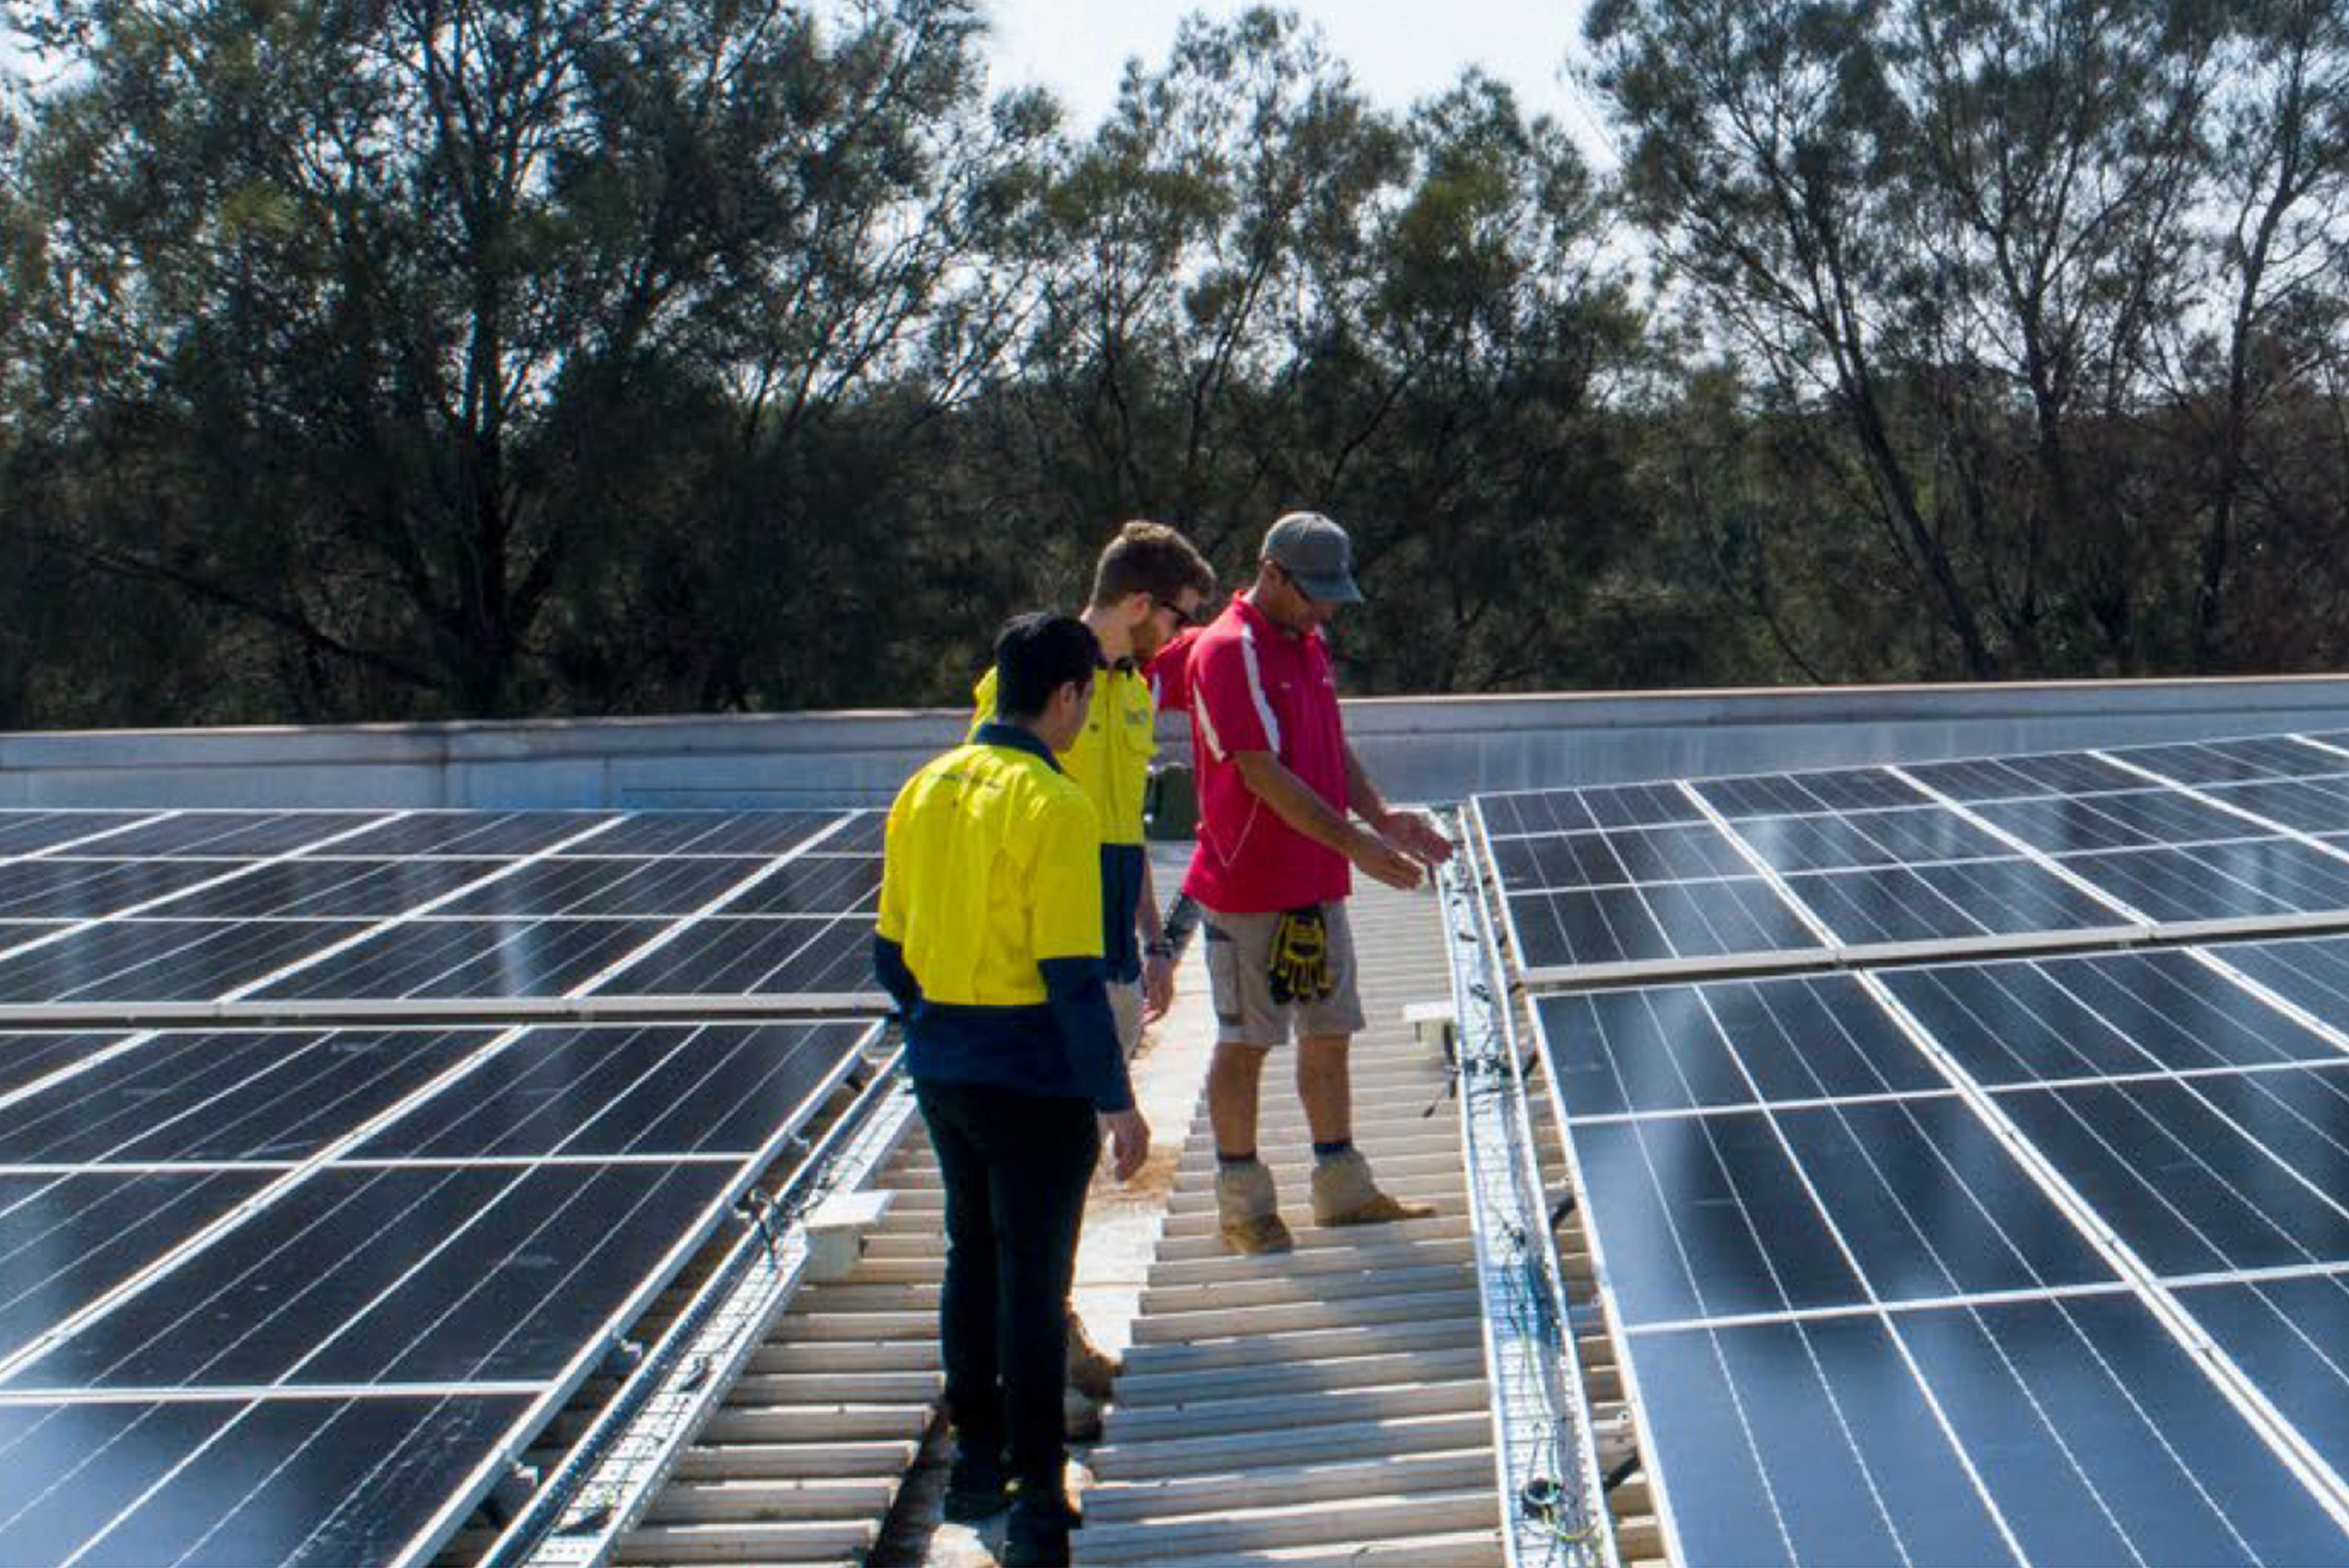 Three solar energy specialists inspecting solar panels on a rooftop for quality and performance assessment